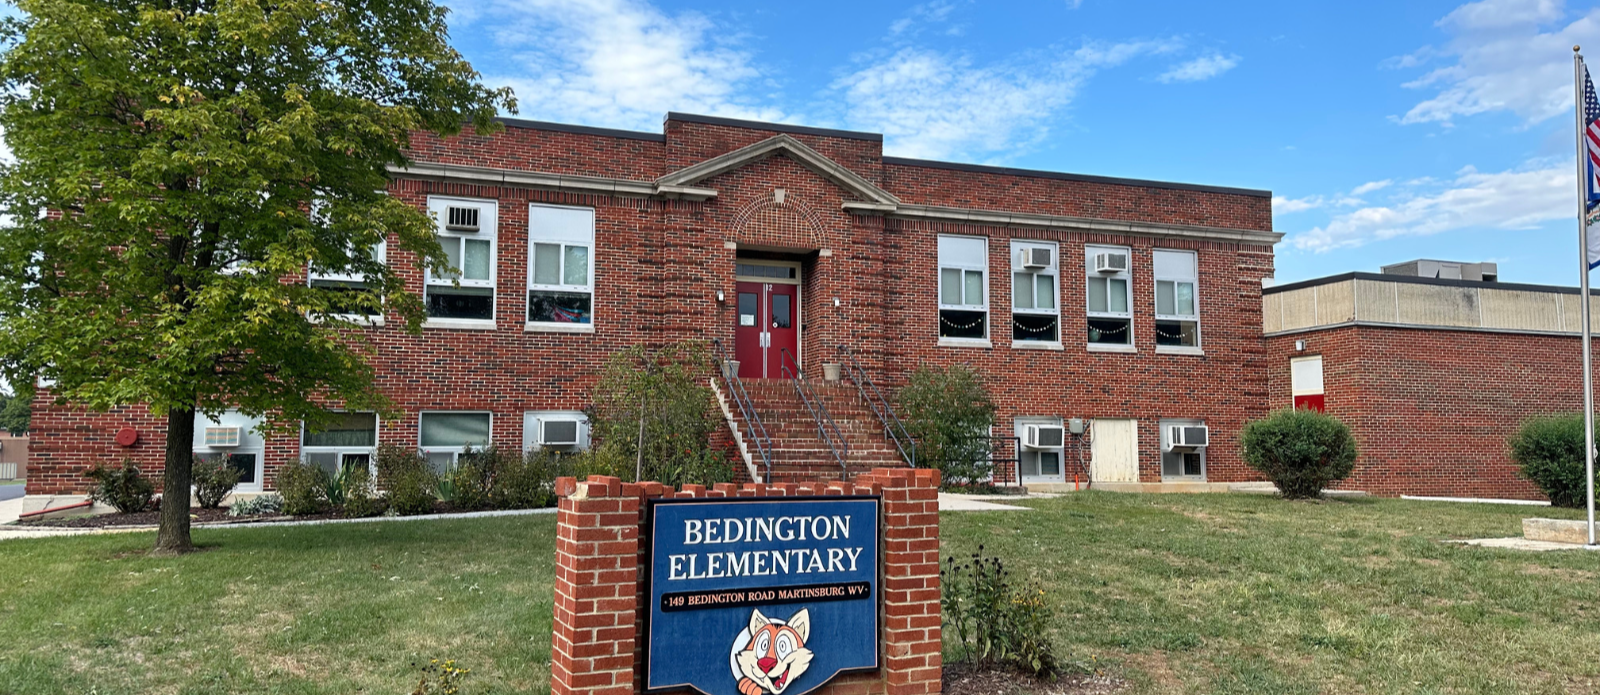 picture of the front of bedington elementary  - brick school building with red doors, grass lawn in front of it,  with blue bedington elementary sign on lawn